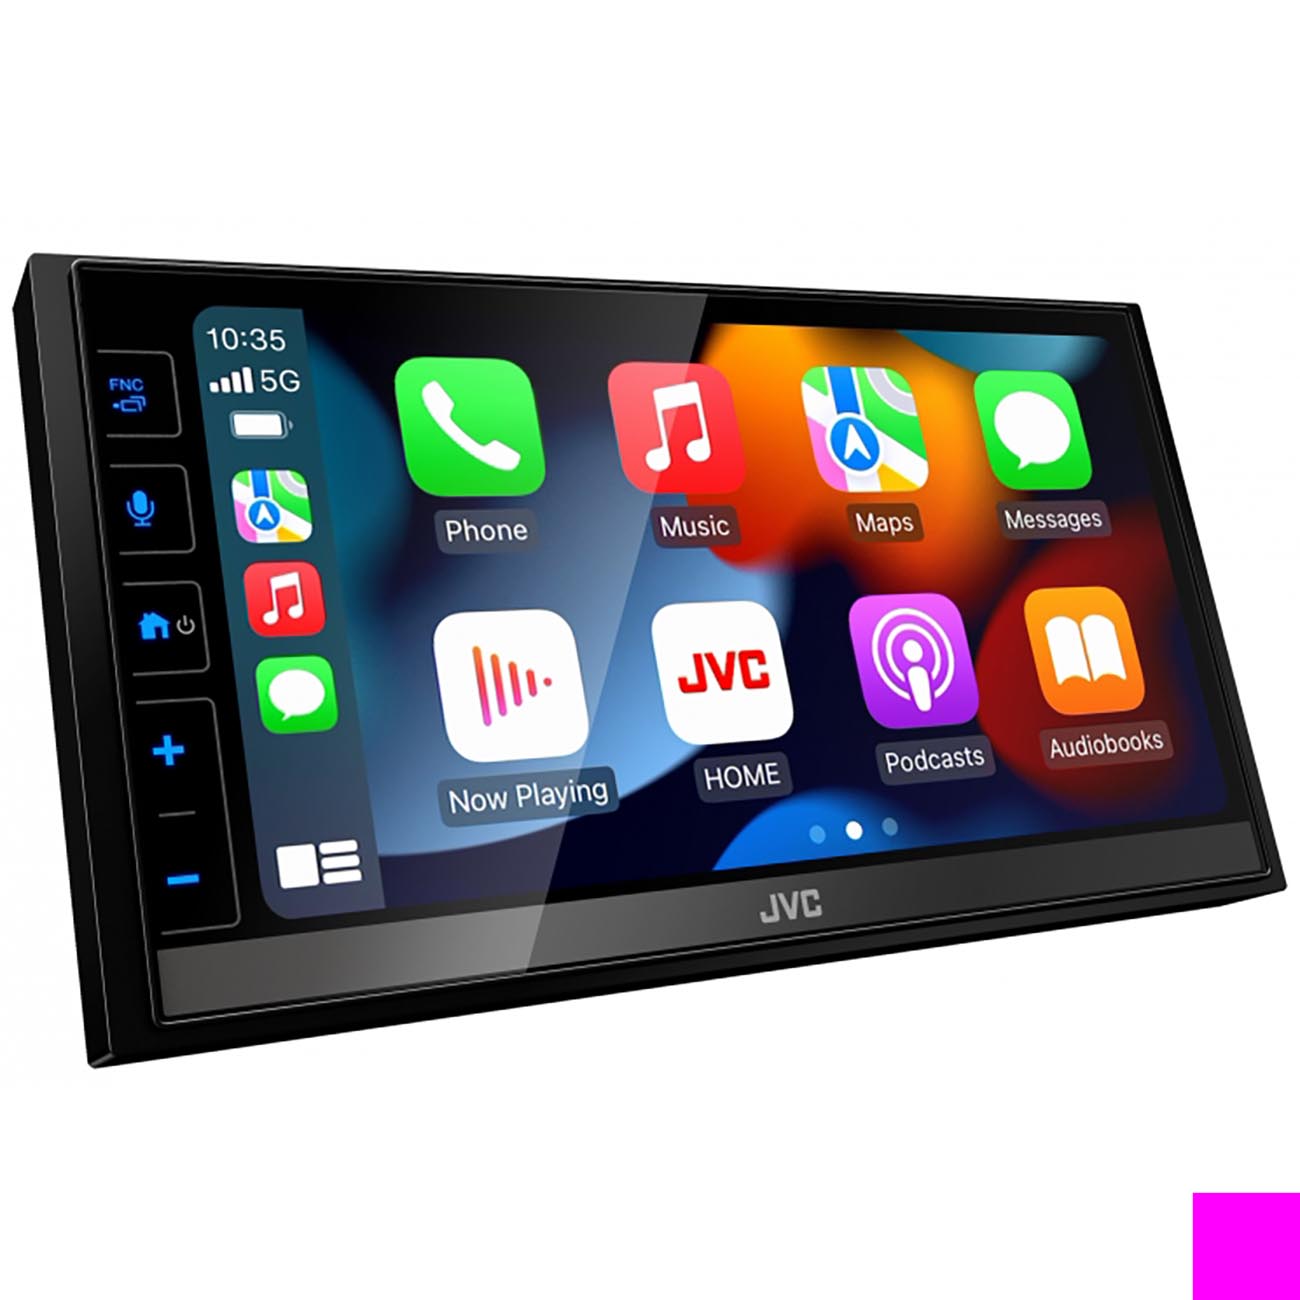 Jvc 6.8” Double Din Mechless Fixed Face Touchscreen Receiver With Usb Android Mirroring & Bluetooth